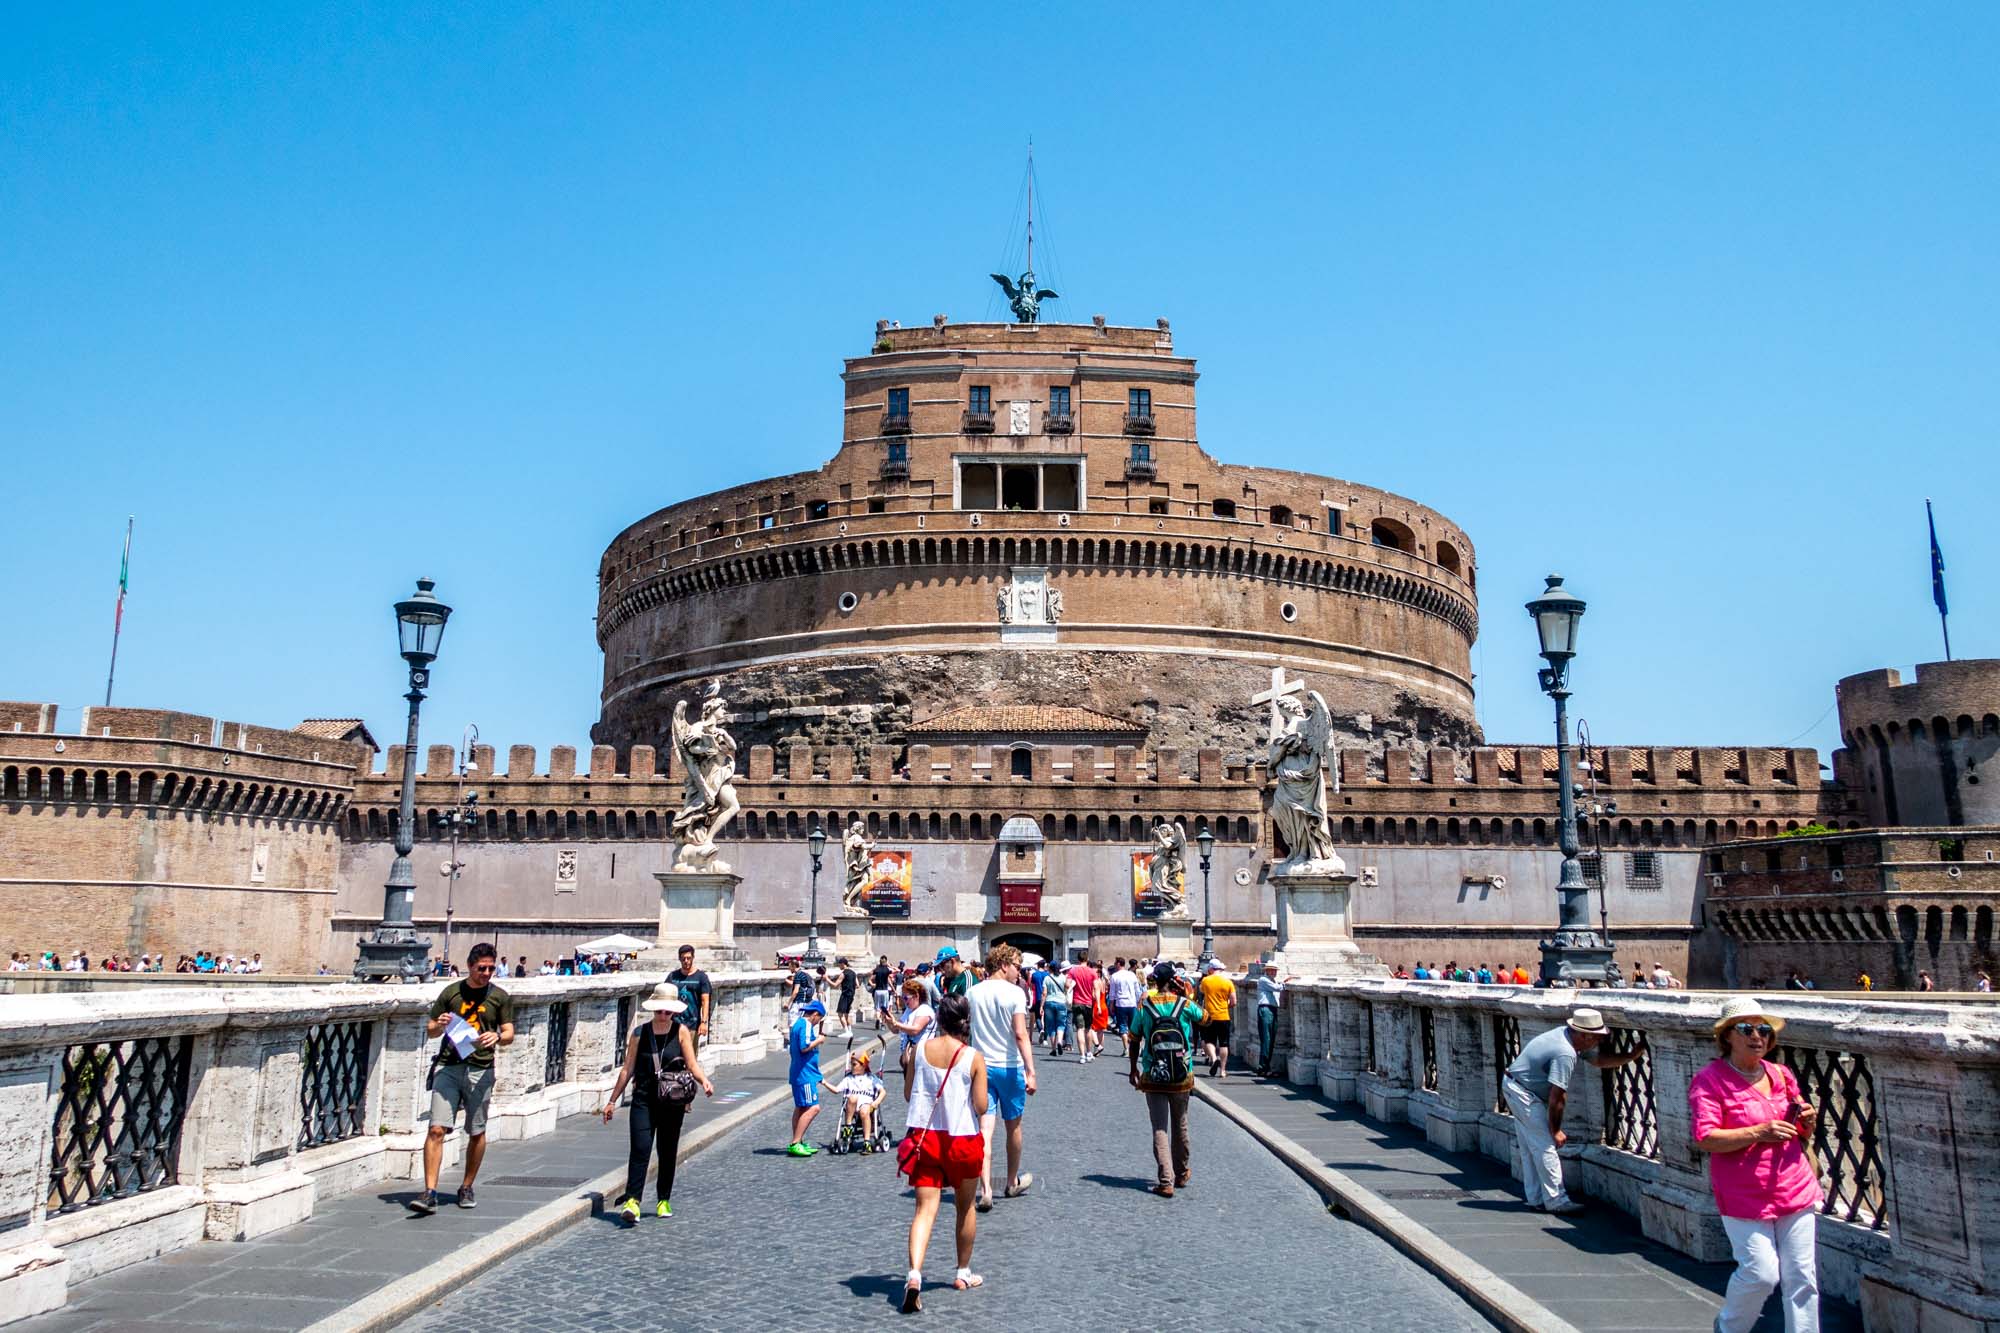 People in front of the circular Castel Sant'Angelo in Rome